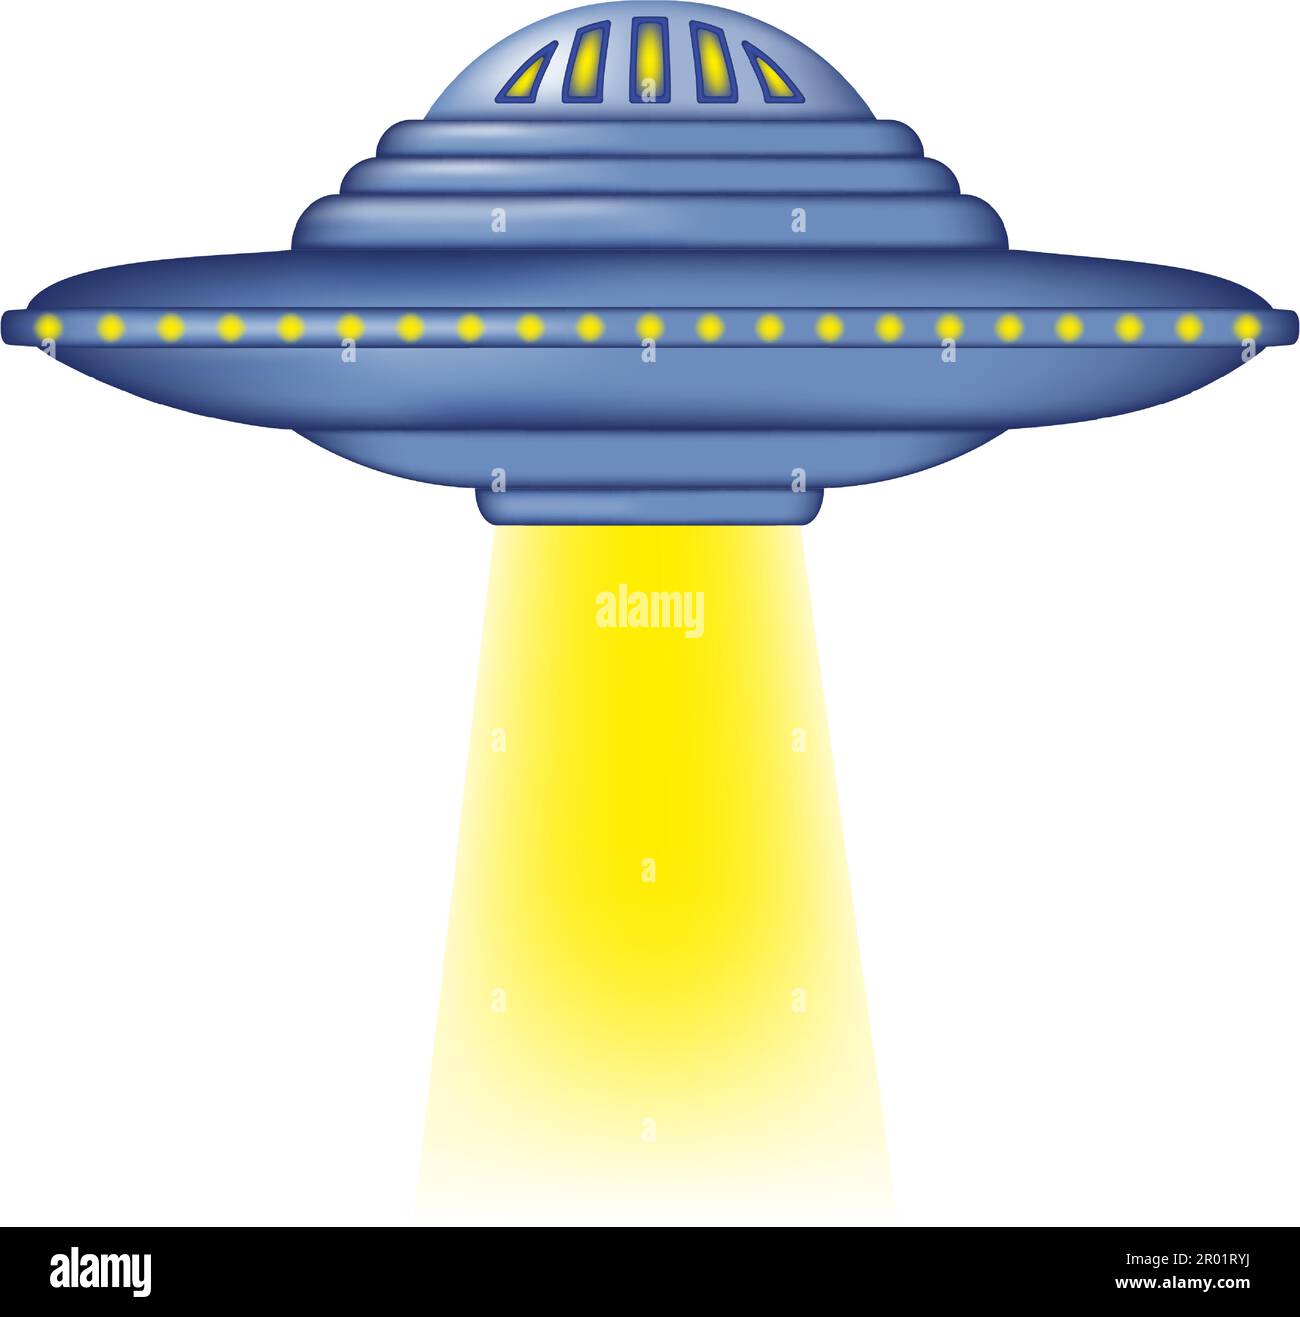 A UFO taking off emitting a powerful beam of light. Isolated alien spaceship with yellow light. Flying saucer 3d. Vector illustration. Stock Vector